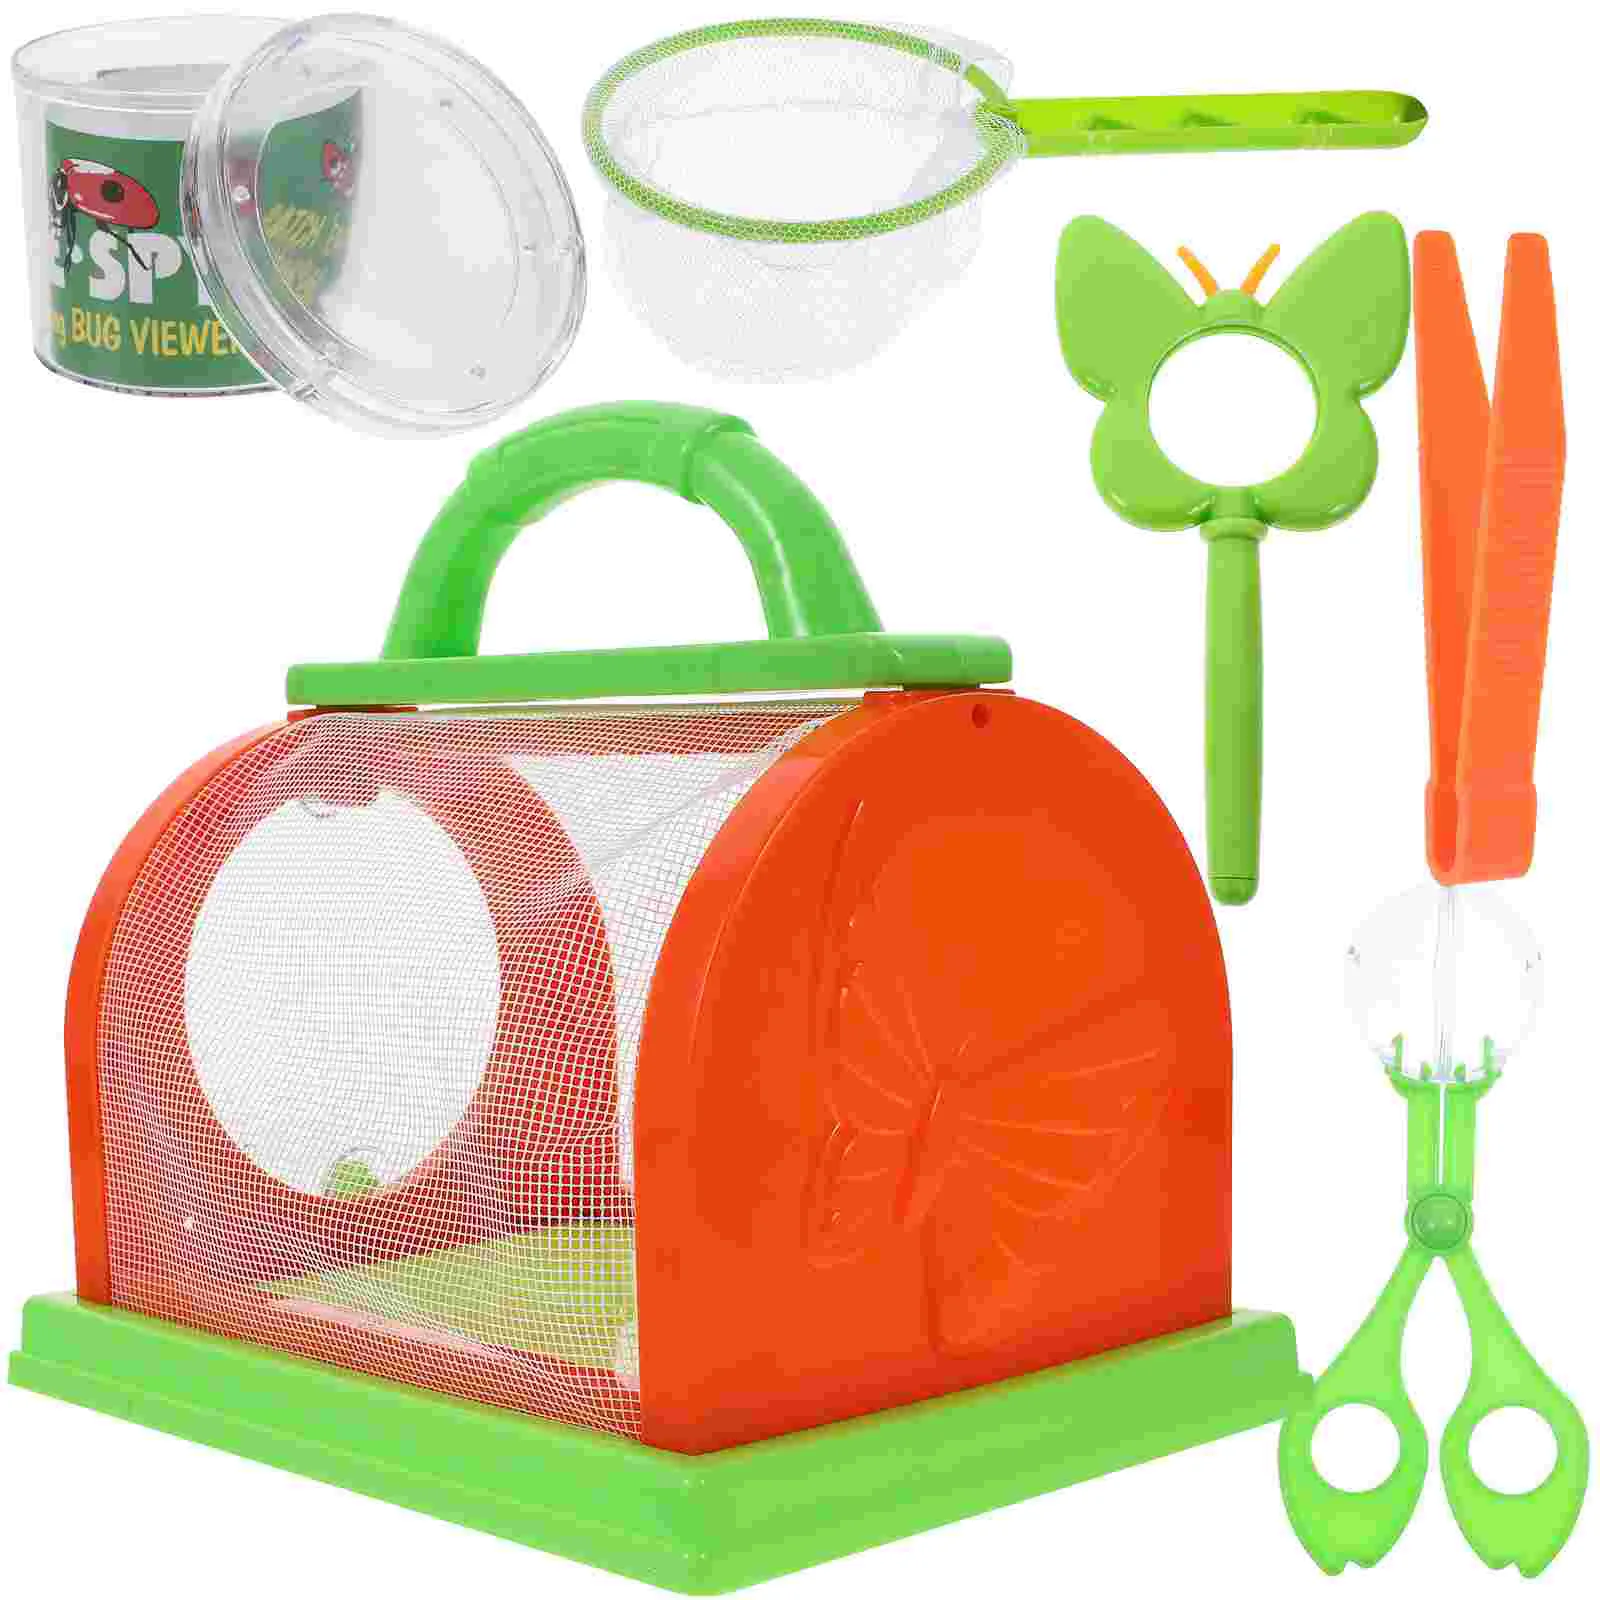 

Bug Kit Catcher Box Kids Insect Observation Outdoor Catching Exploration Toy Critter Science Set Case Collector Cage Nature Net